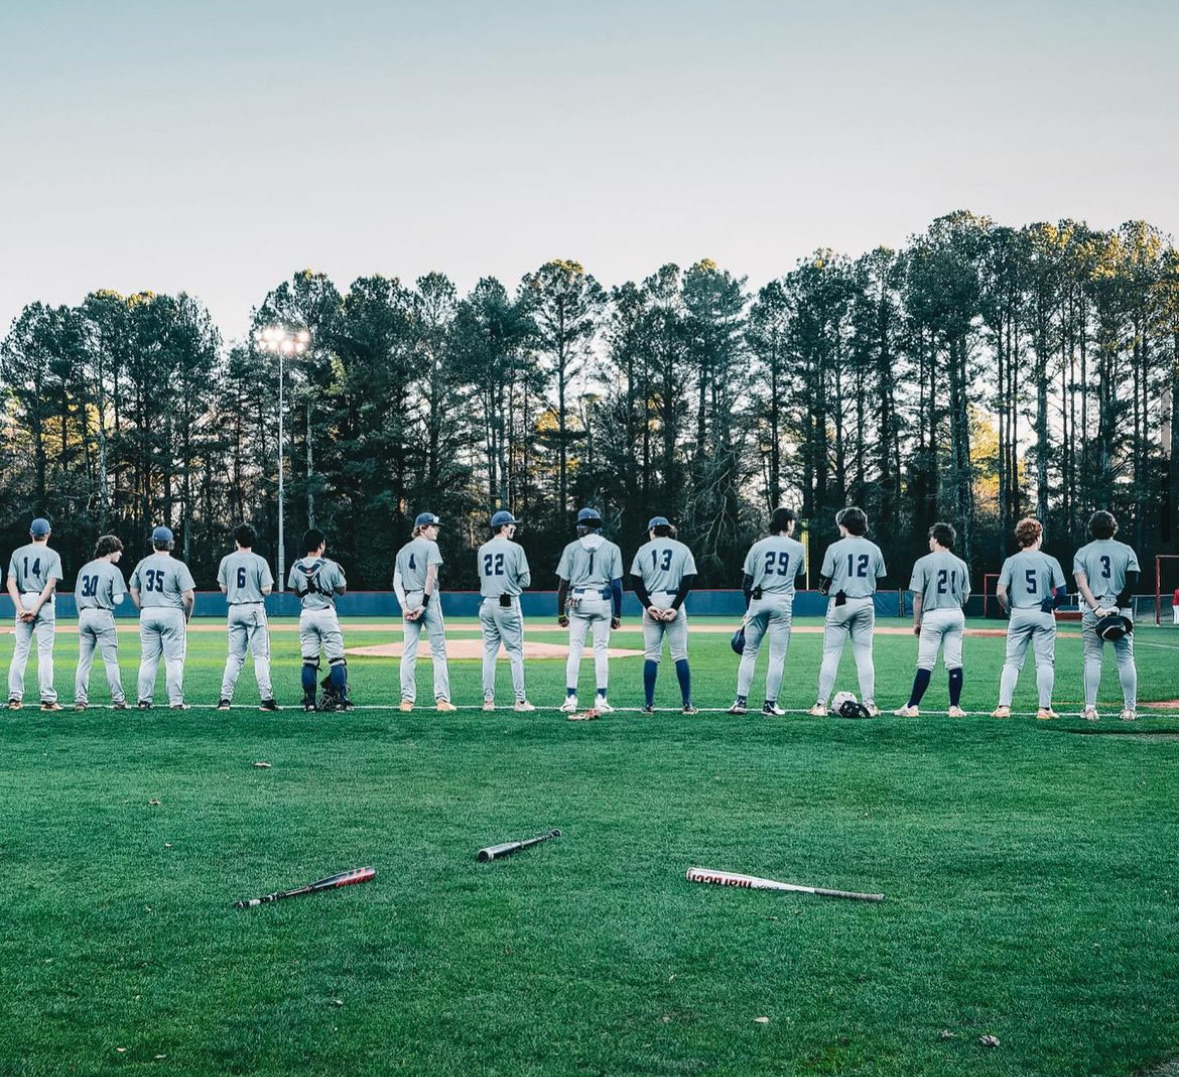 Chamblee’s Varsity Baseball team lined up on the first baseline.
Photo courtesy of Cooper Hill